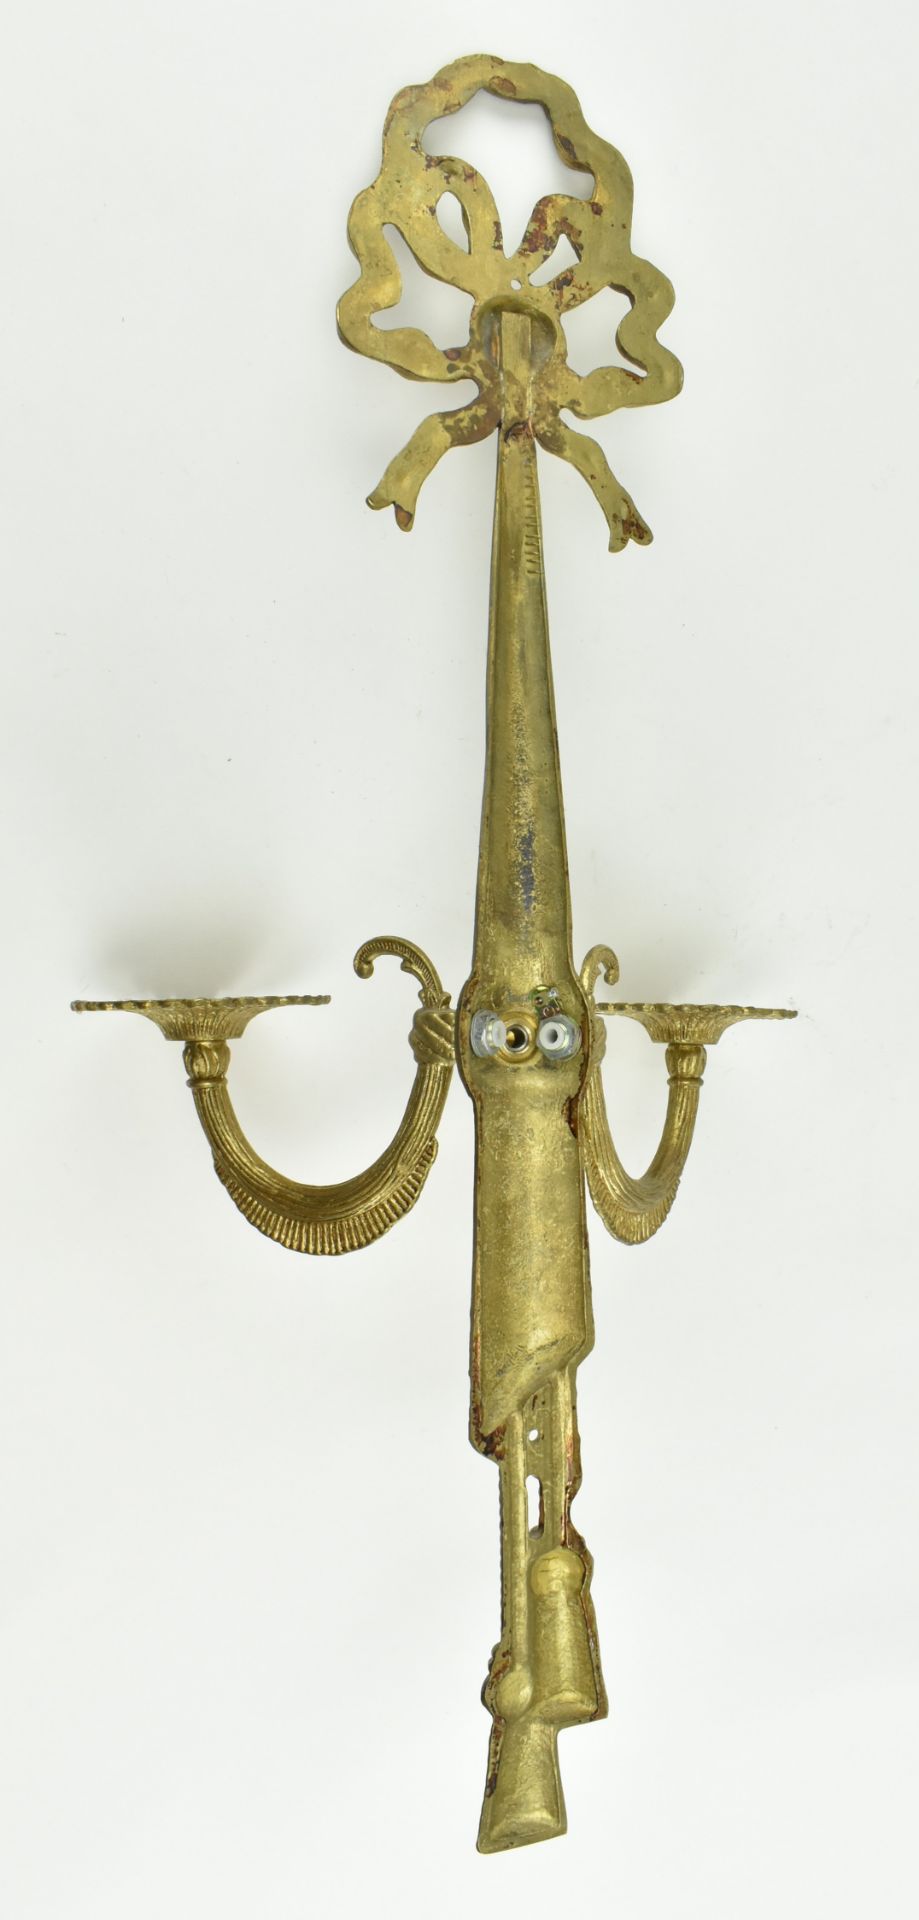 EARLY 20TH CENTURY REGENCY REVIVAL GILT METAL WALL SCONCE - Image 7 of 7